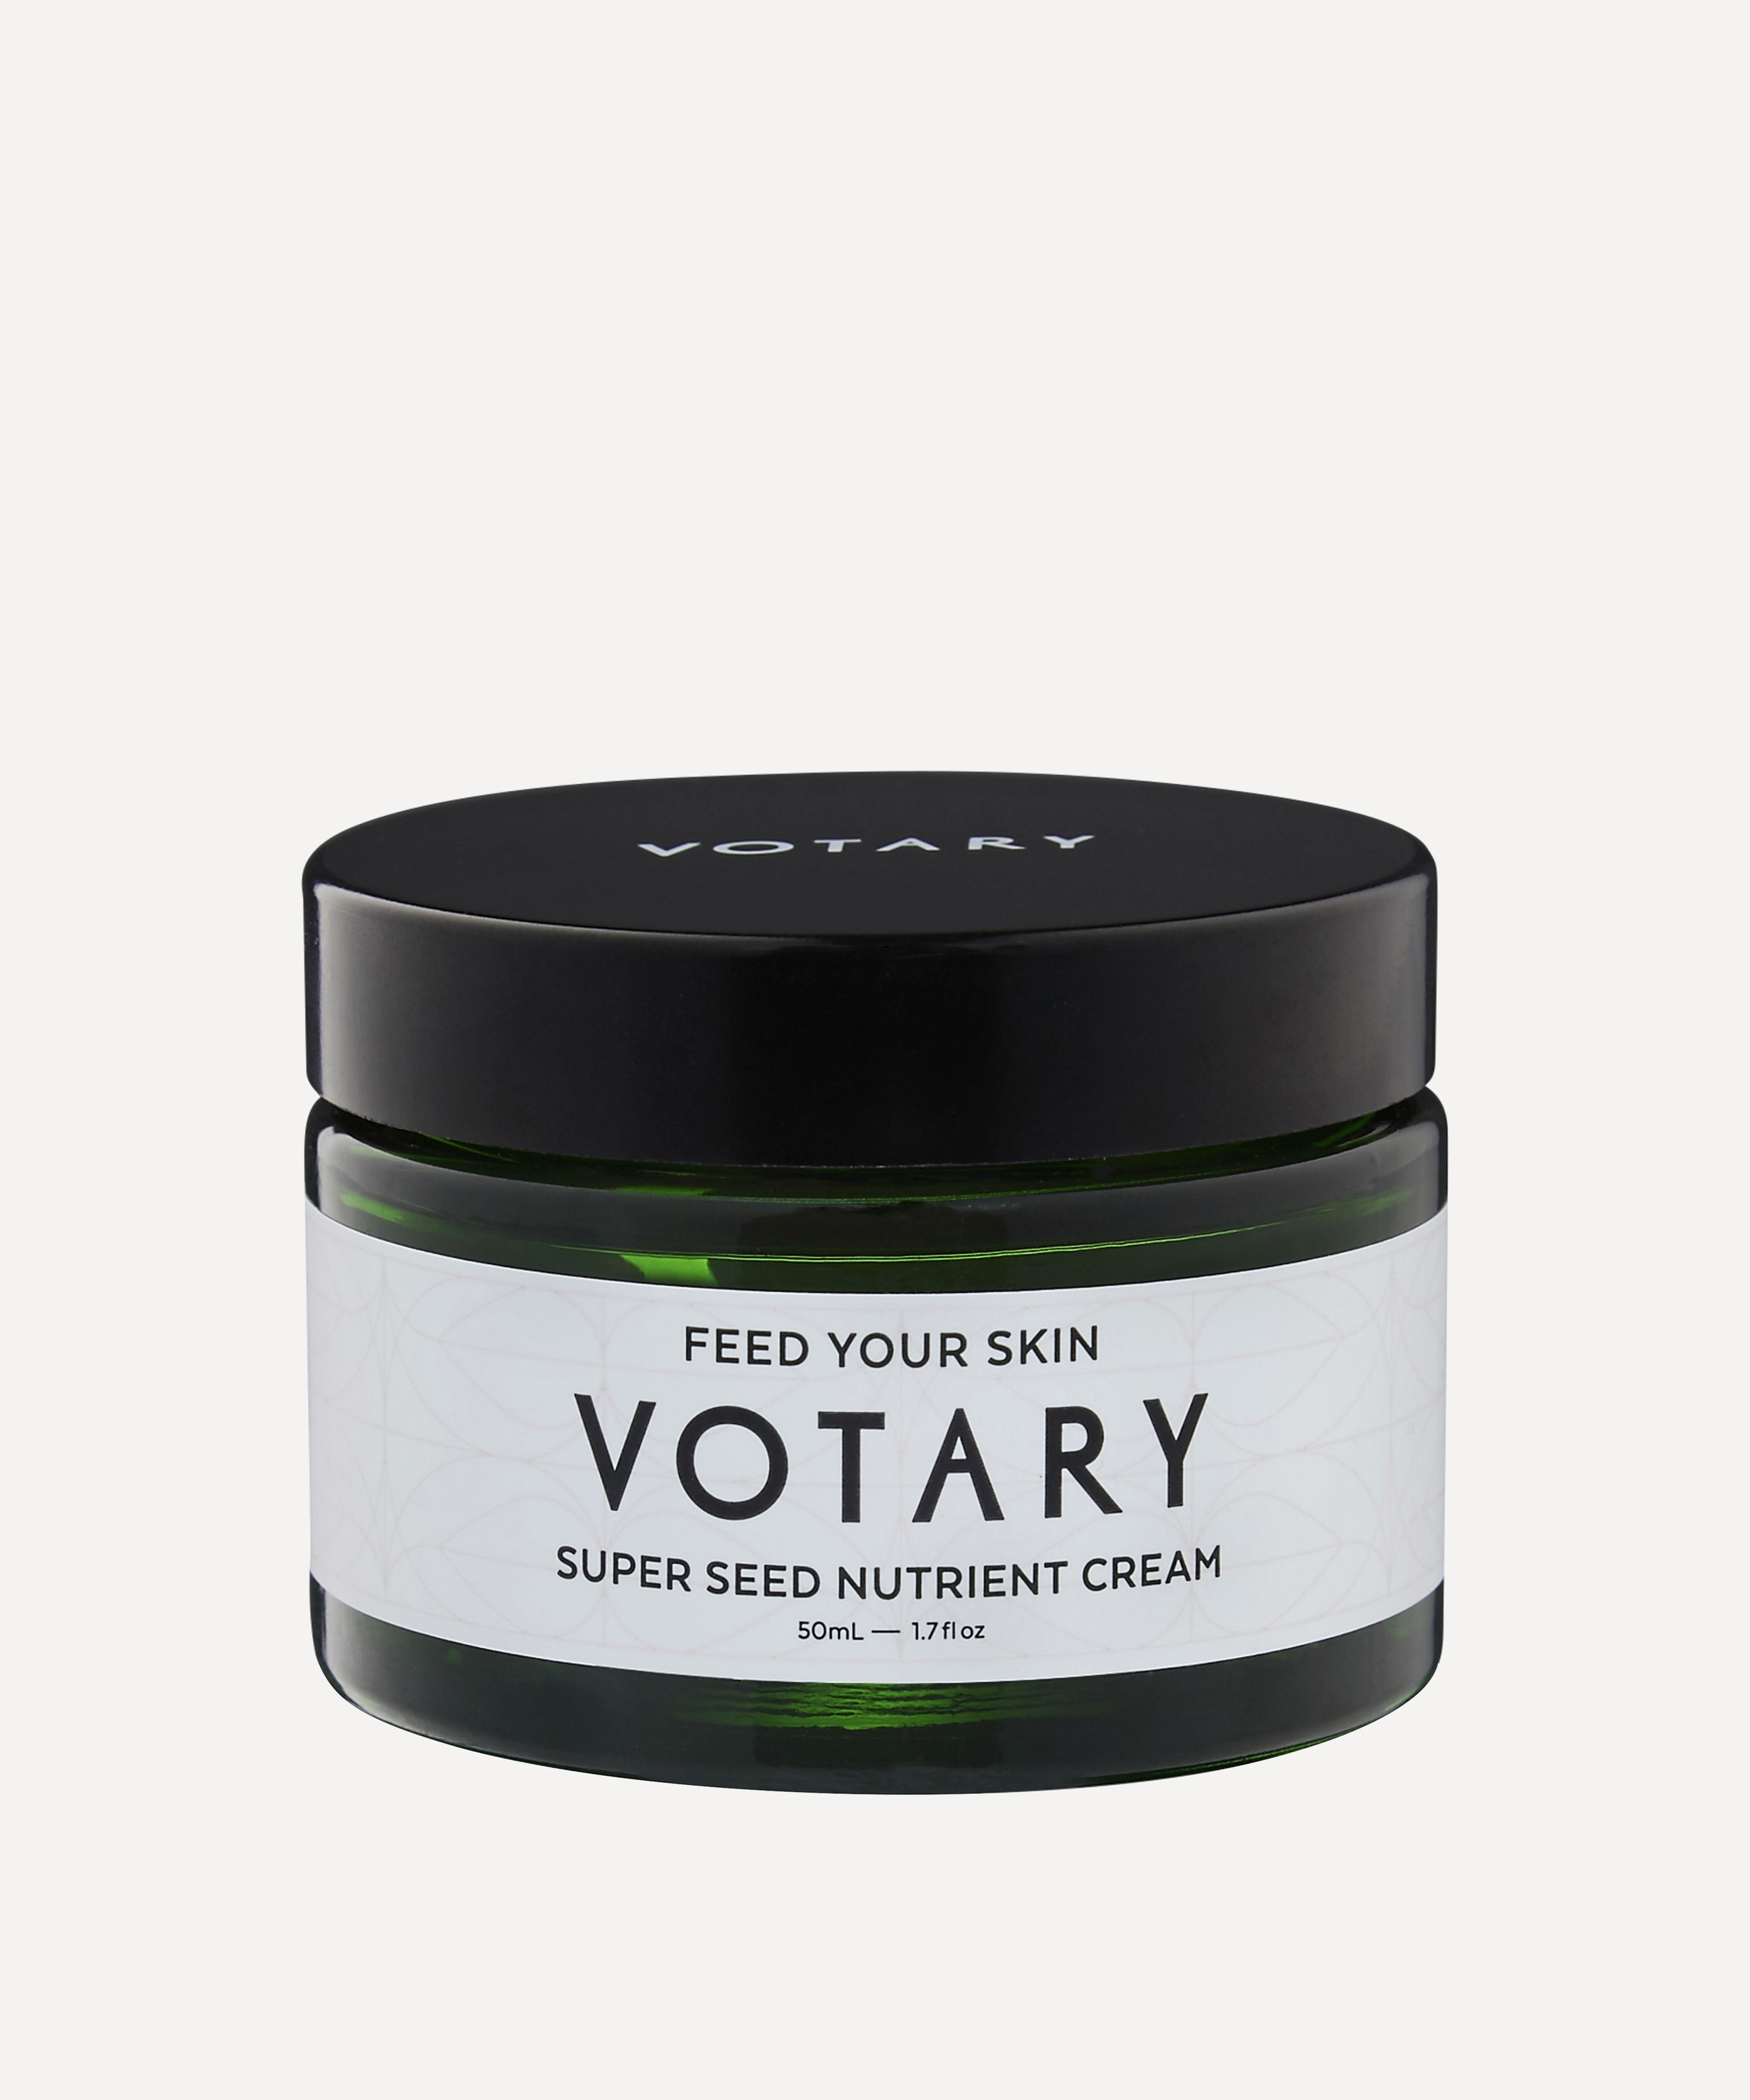 Votary - Super Seed Nutrient Cream 50ml image number 0